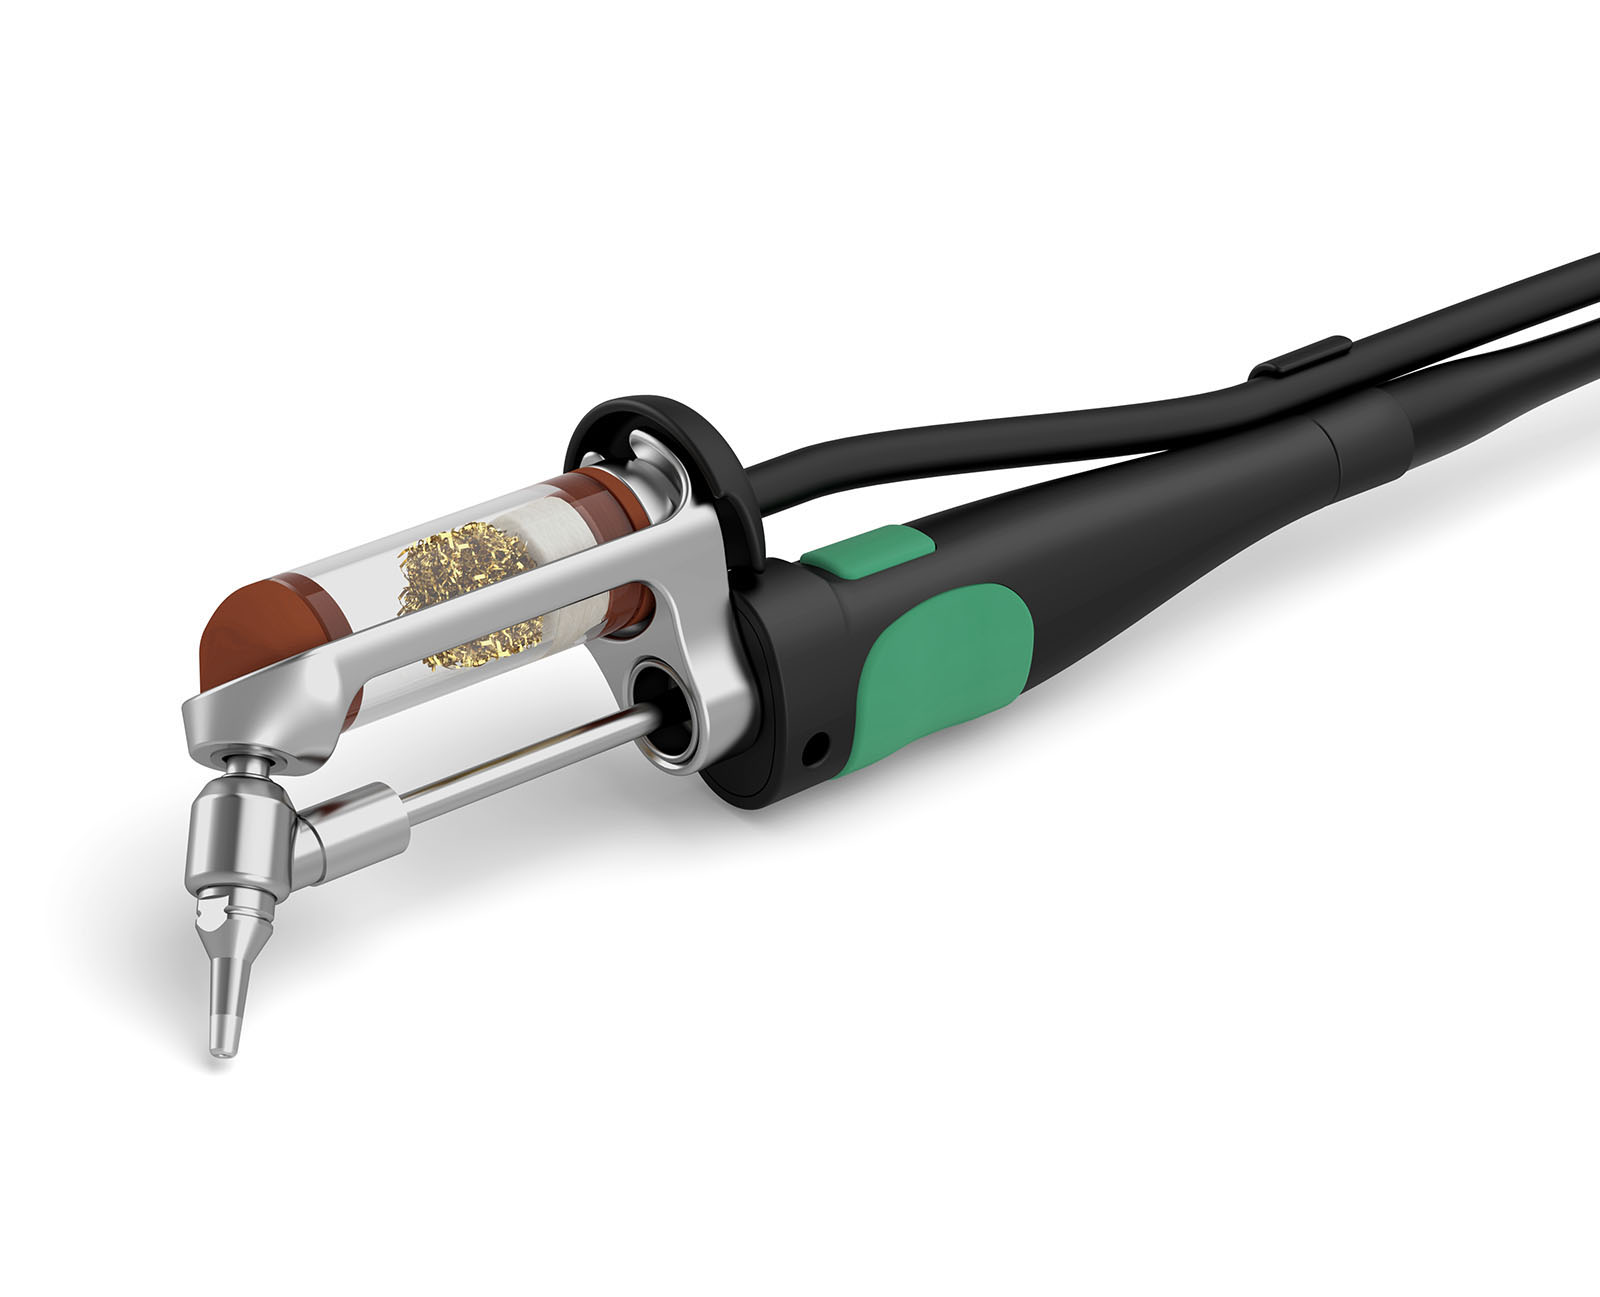 DT530-A - Angled Desoldering Iron